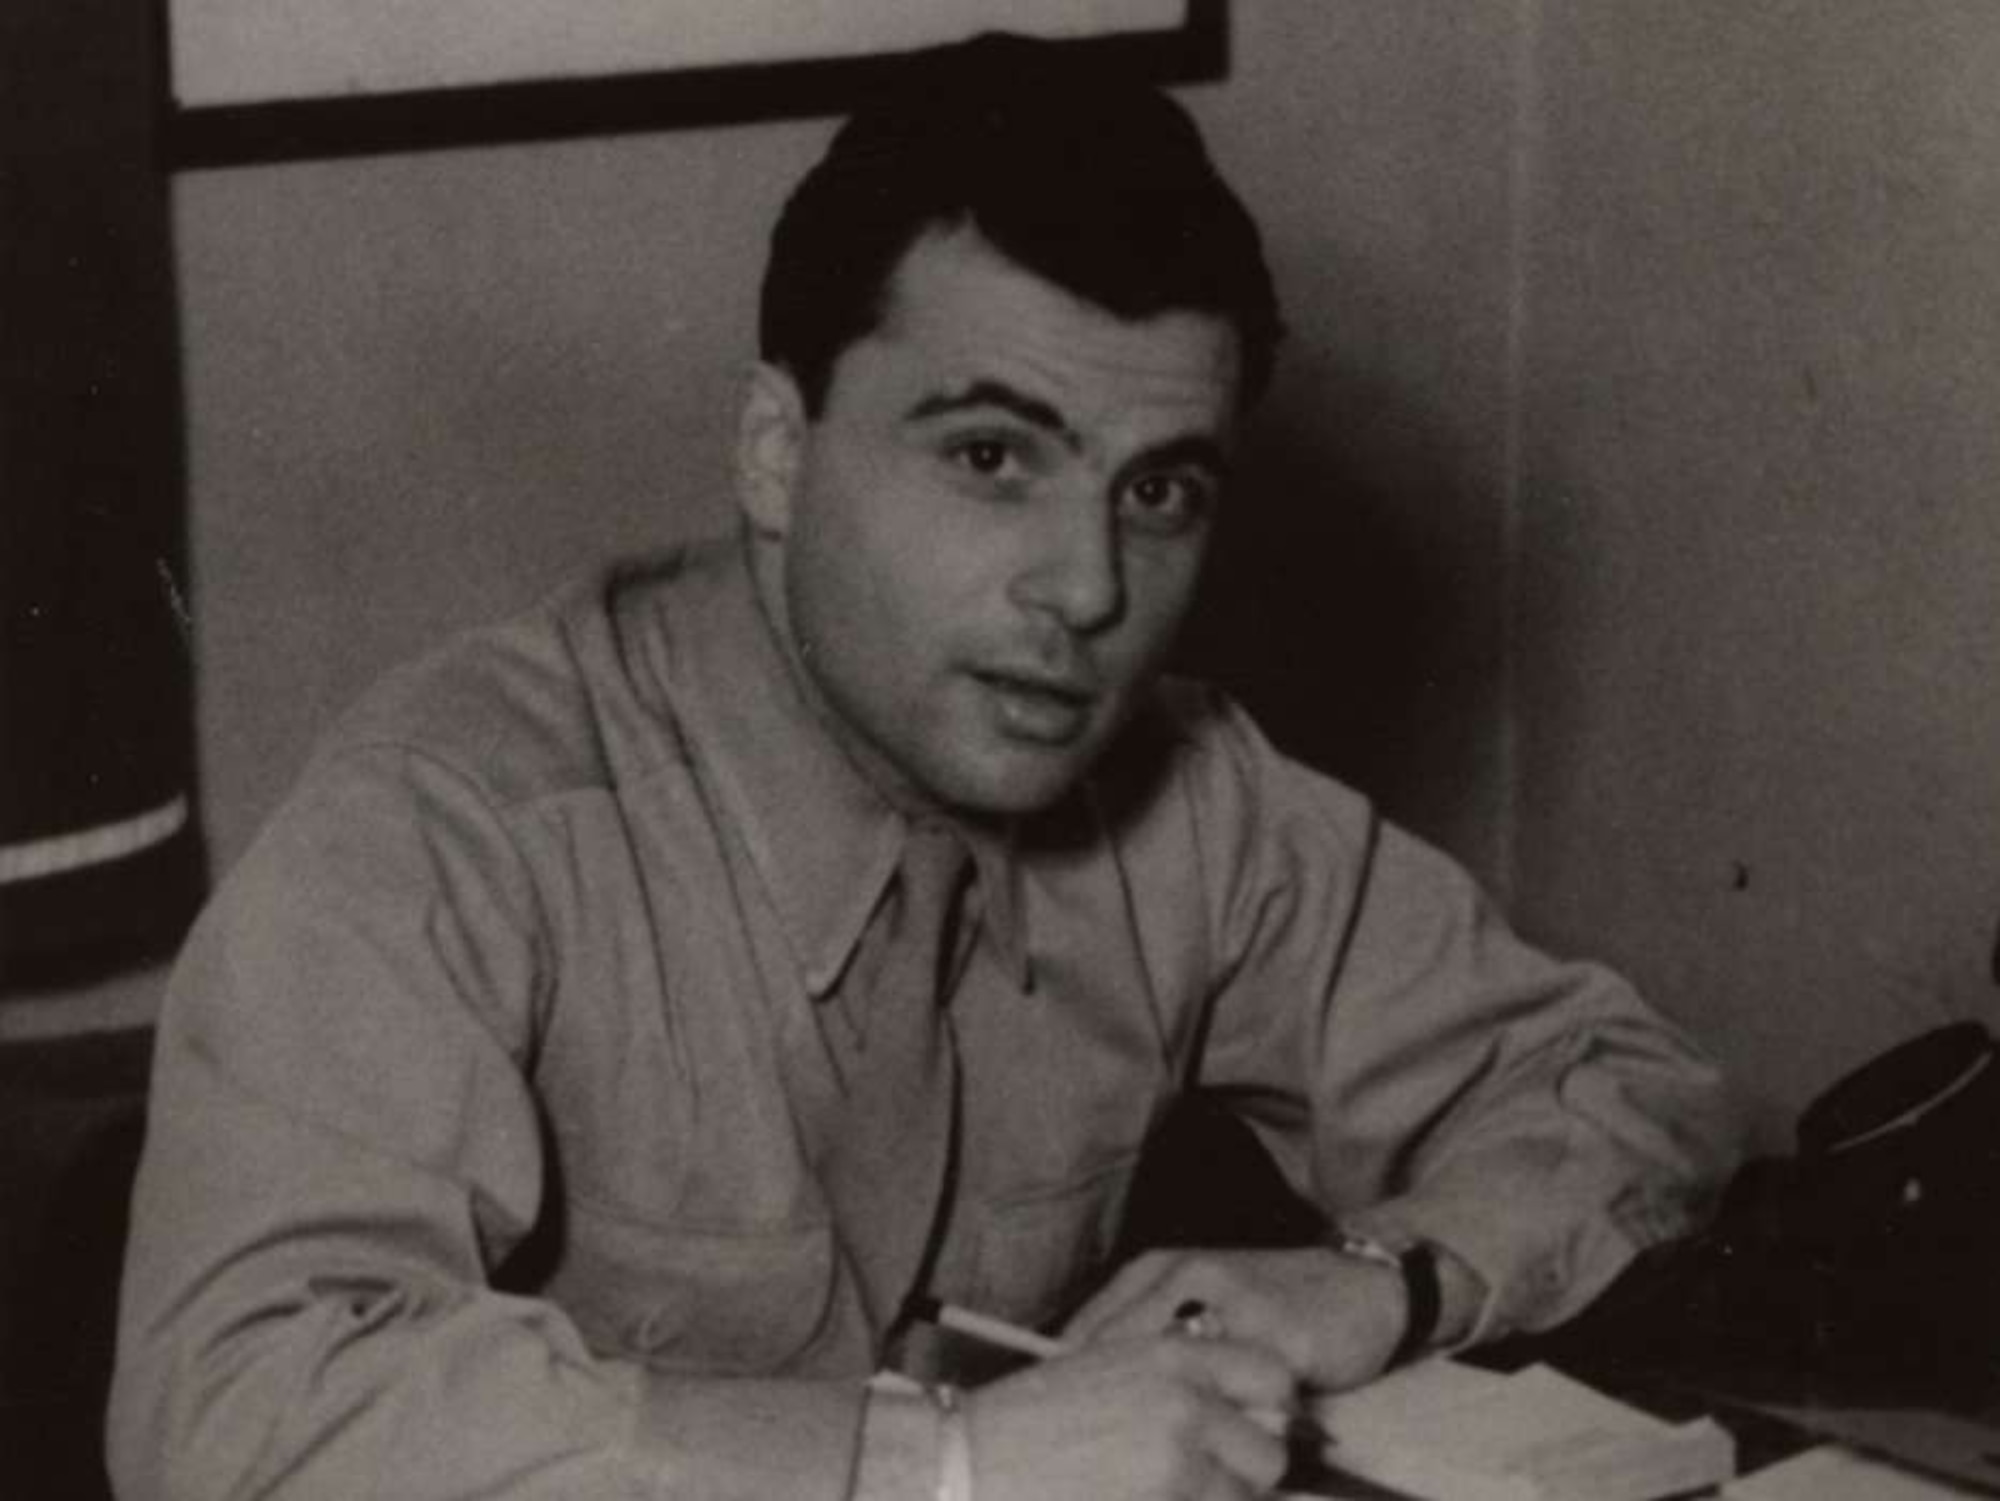 Bob Behr in his Army uniform. Following his liberation in 1945, Behr, a Holocaust survivor, would eventually immigrate to the U.S., where he enlisted in the Army, and later worked for the Air Force as a civilian in the intelligence field for more than 35 years. (Photo courtesy/U.S. Holocaust Memorial Museum)